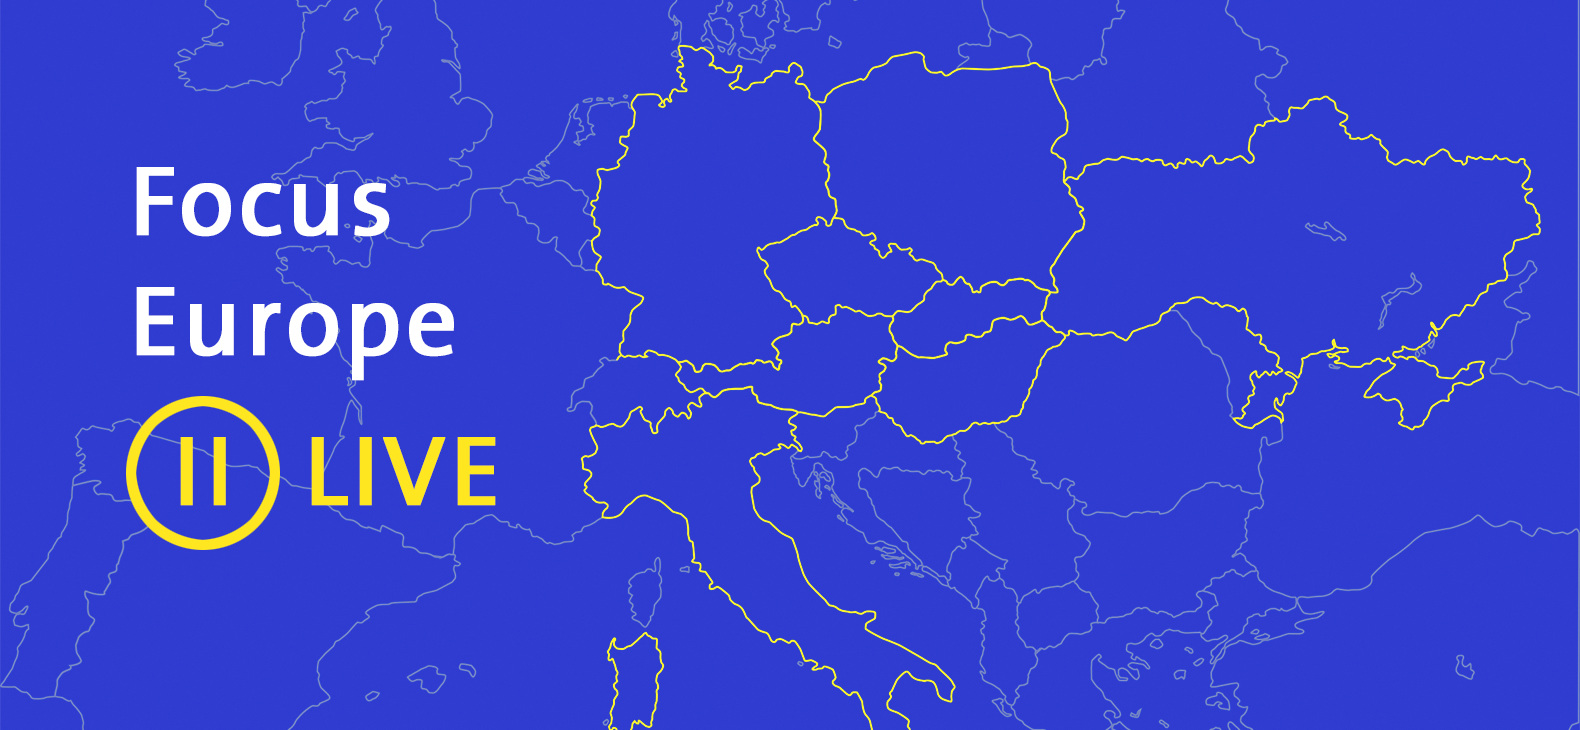 Focus Europe II LIVE - title over a blue map of Europe with hilighted borders of the partner countries